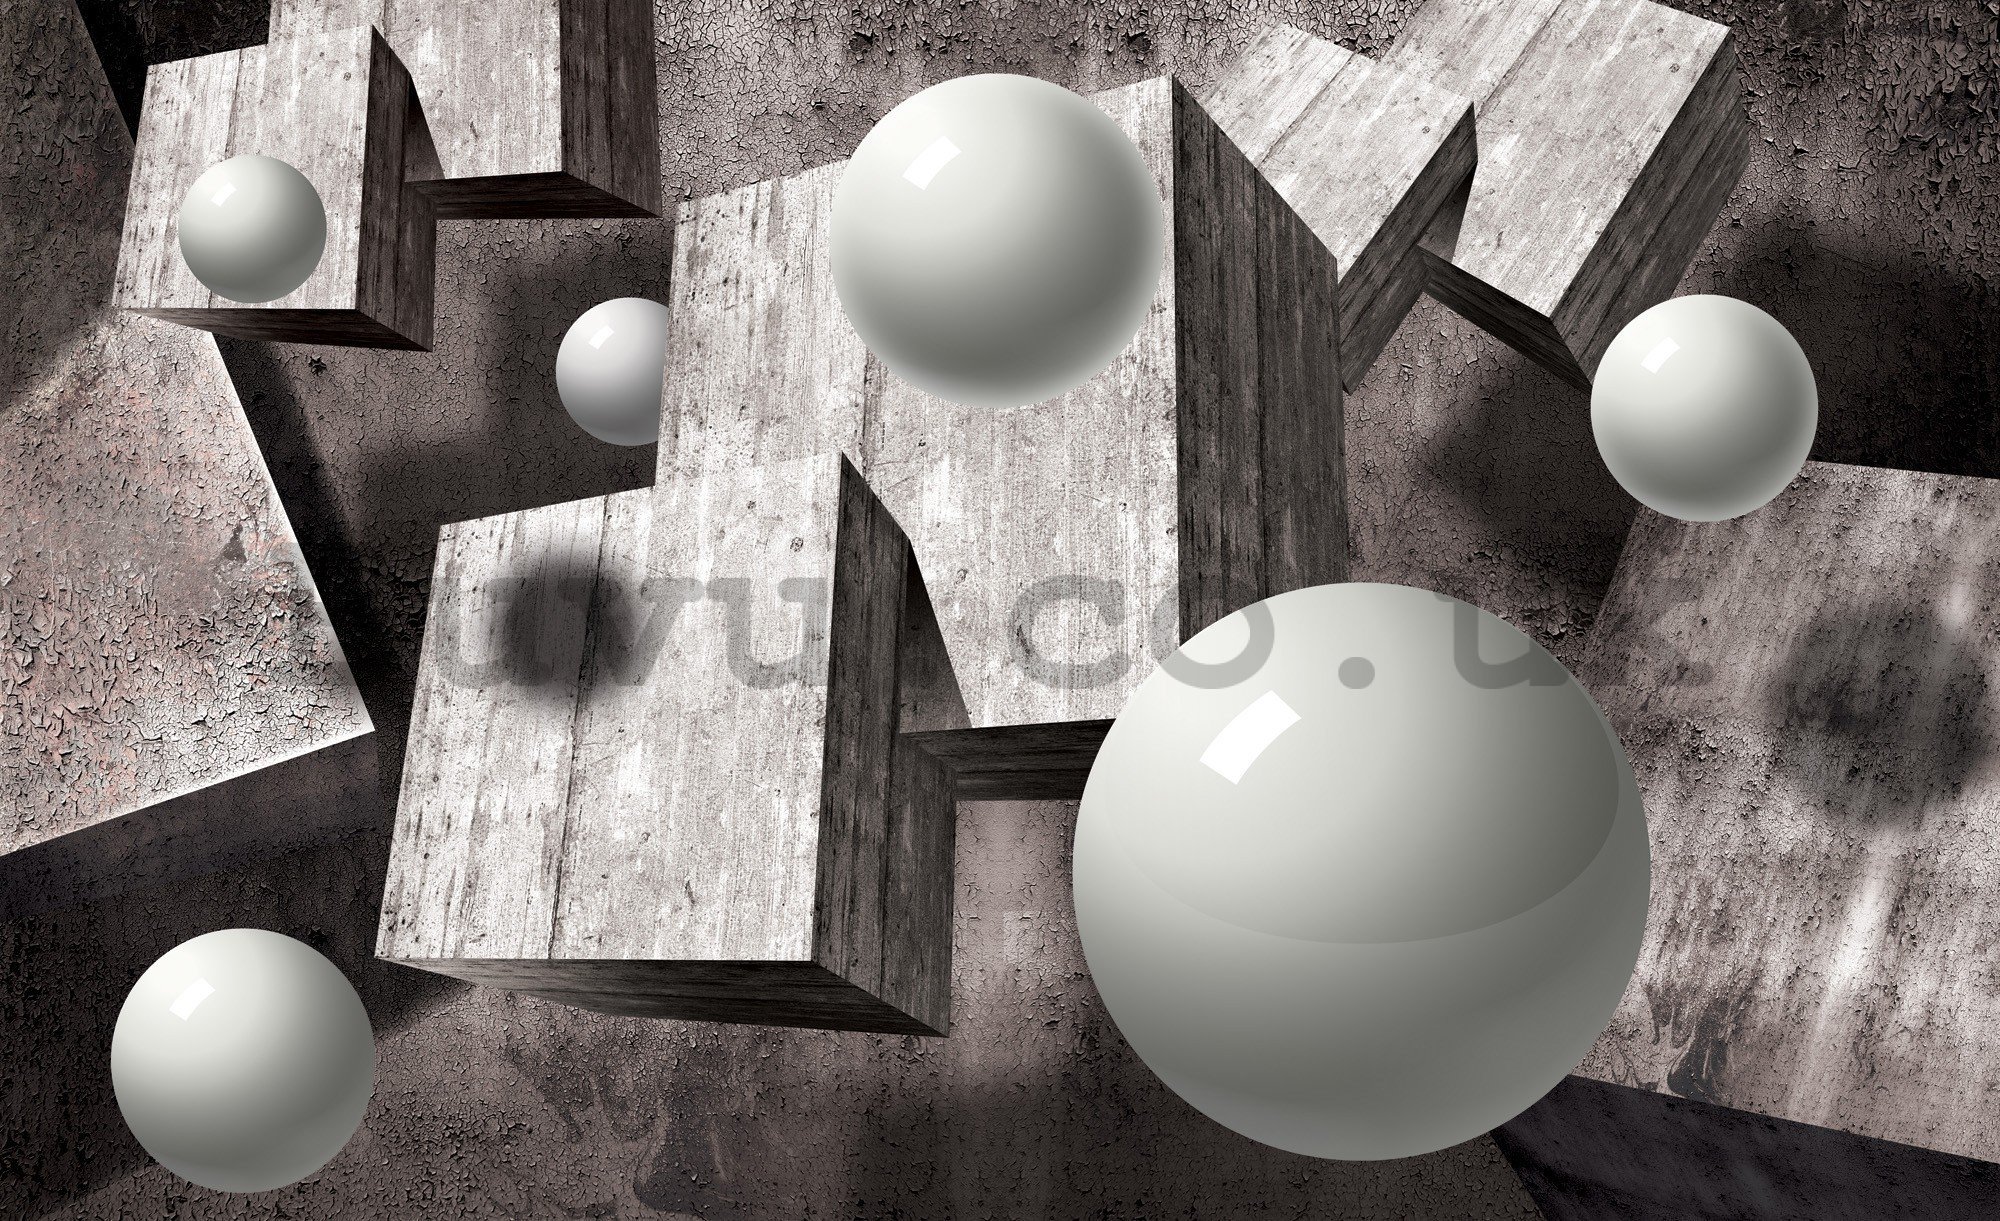 Wall mural vlies: Spheres and cubes - 416x254 cm